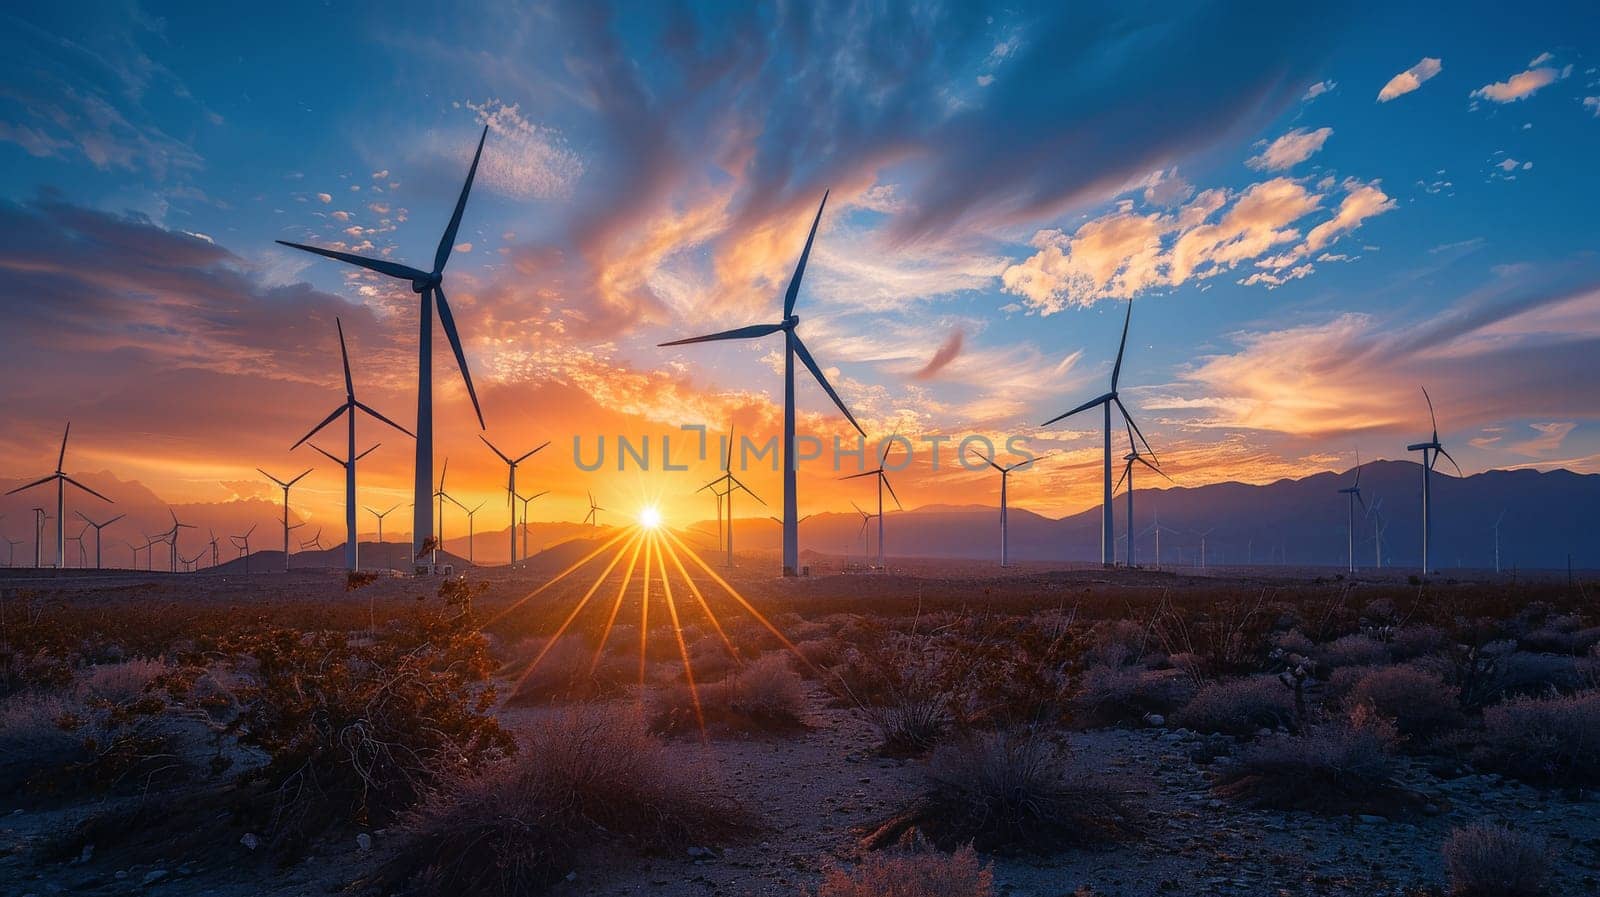 A field of wind turbines with the sun setting in the background.